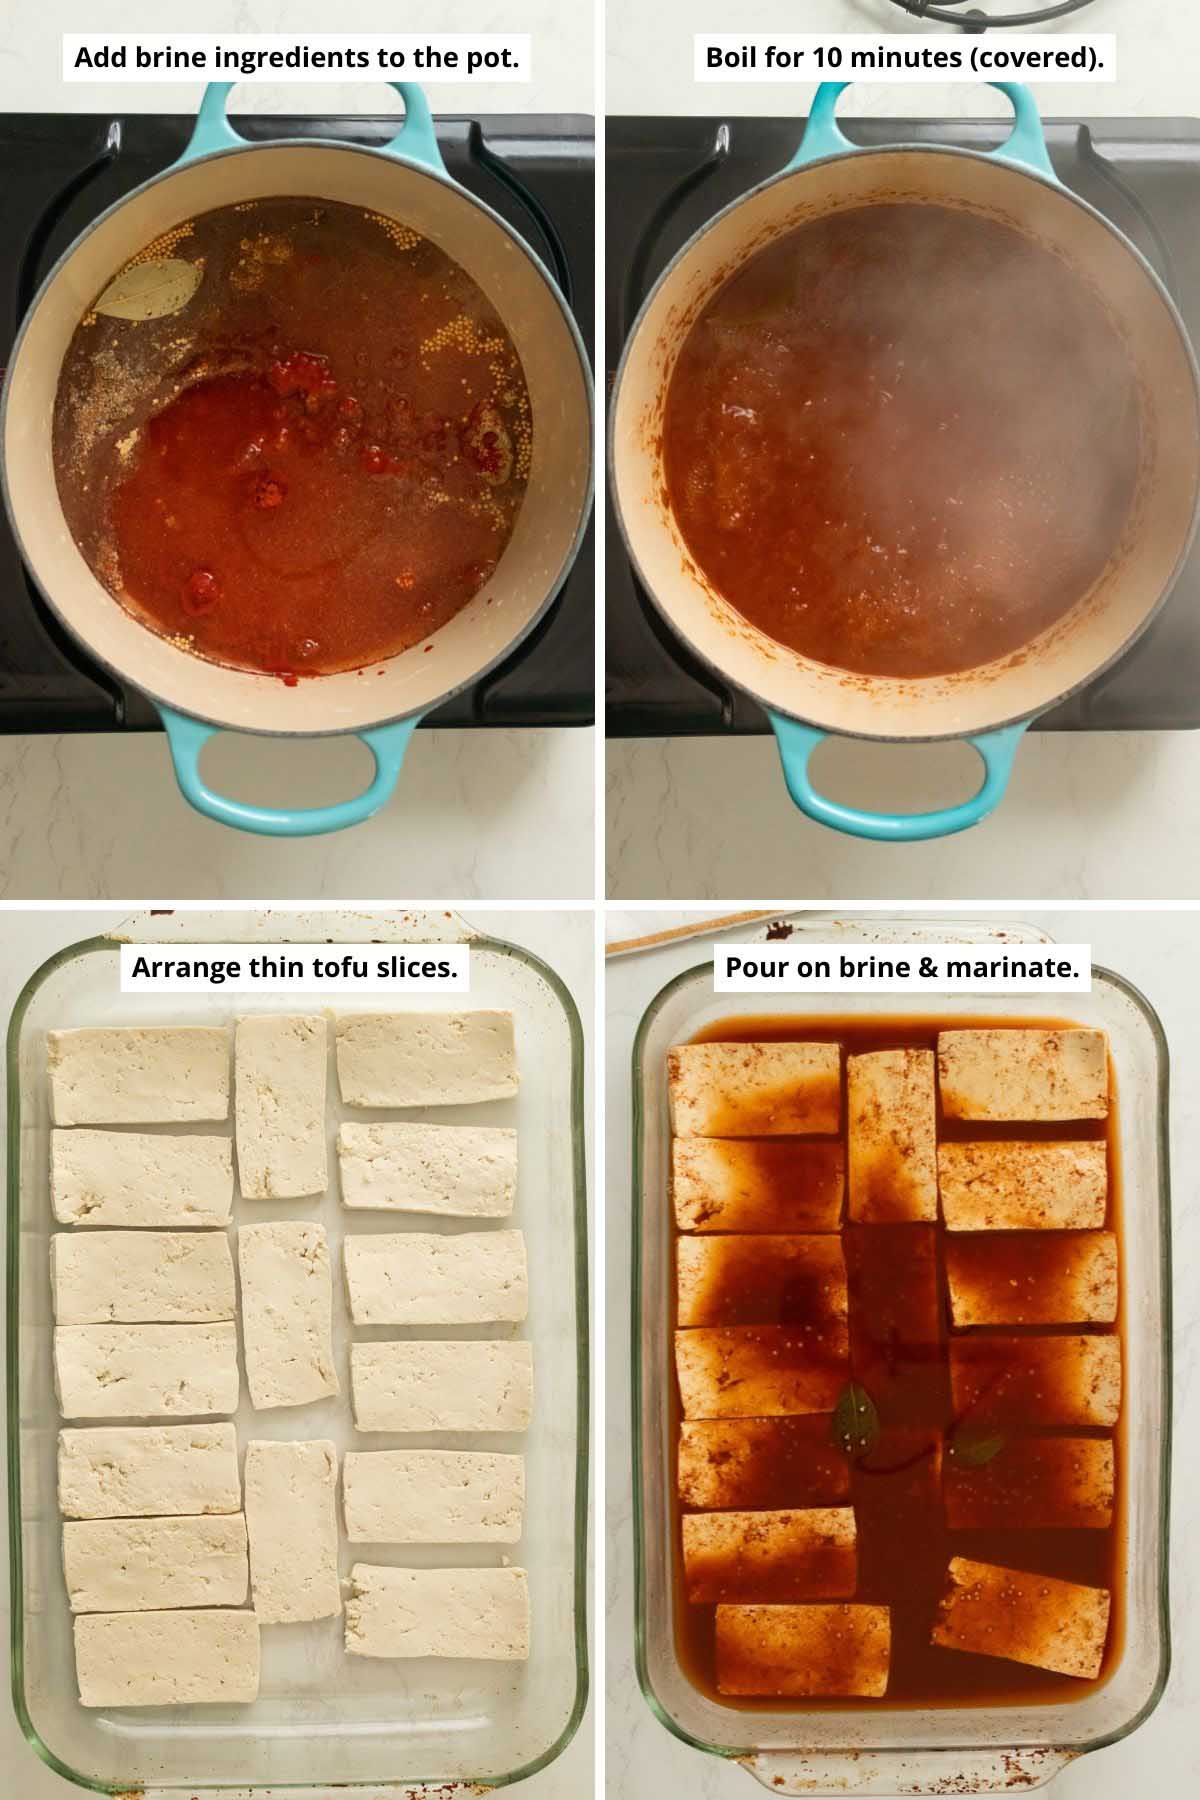 image collage showing the brine ingredients in the pot before and after boiling and the tofu in a pan before and after pouring on the brine